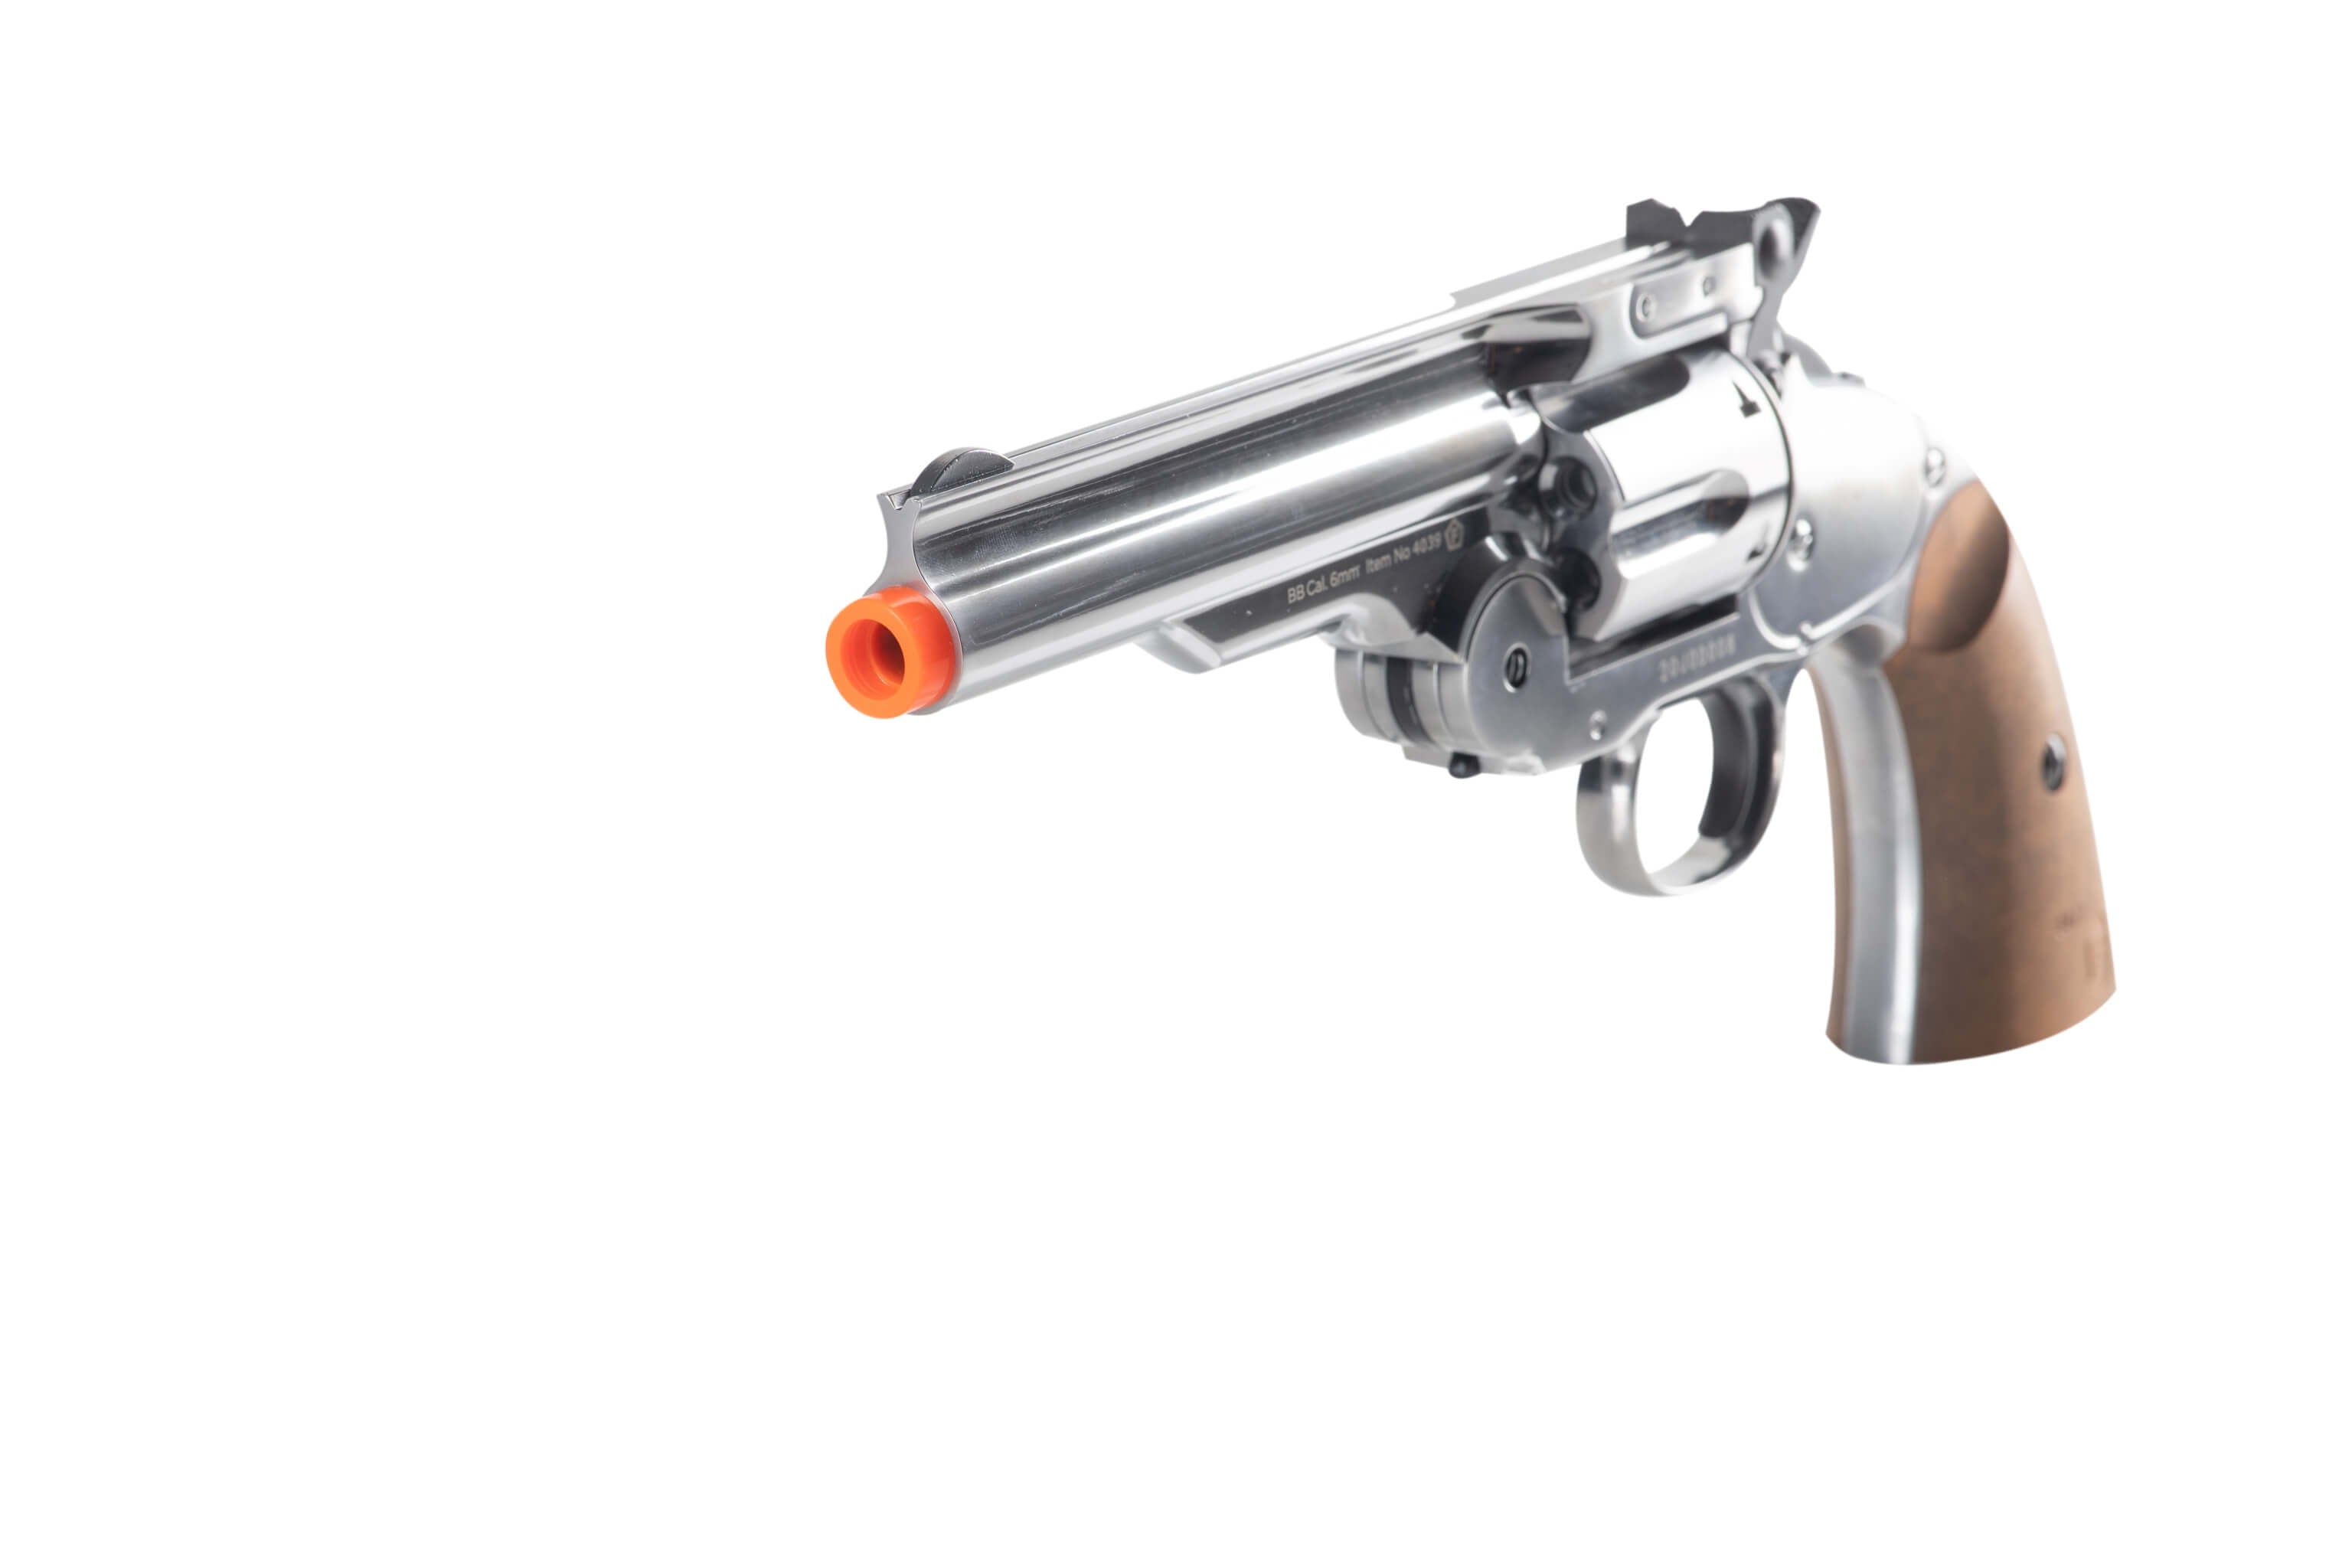 The Schofield 7 Inch Variant: Aged – Barra Airguns